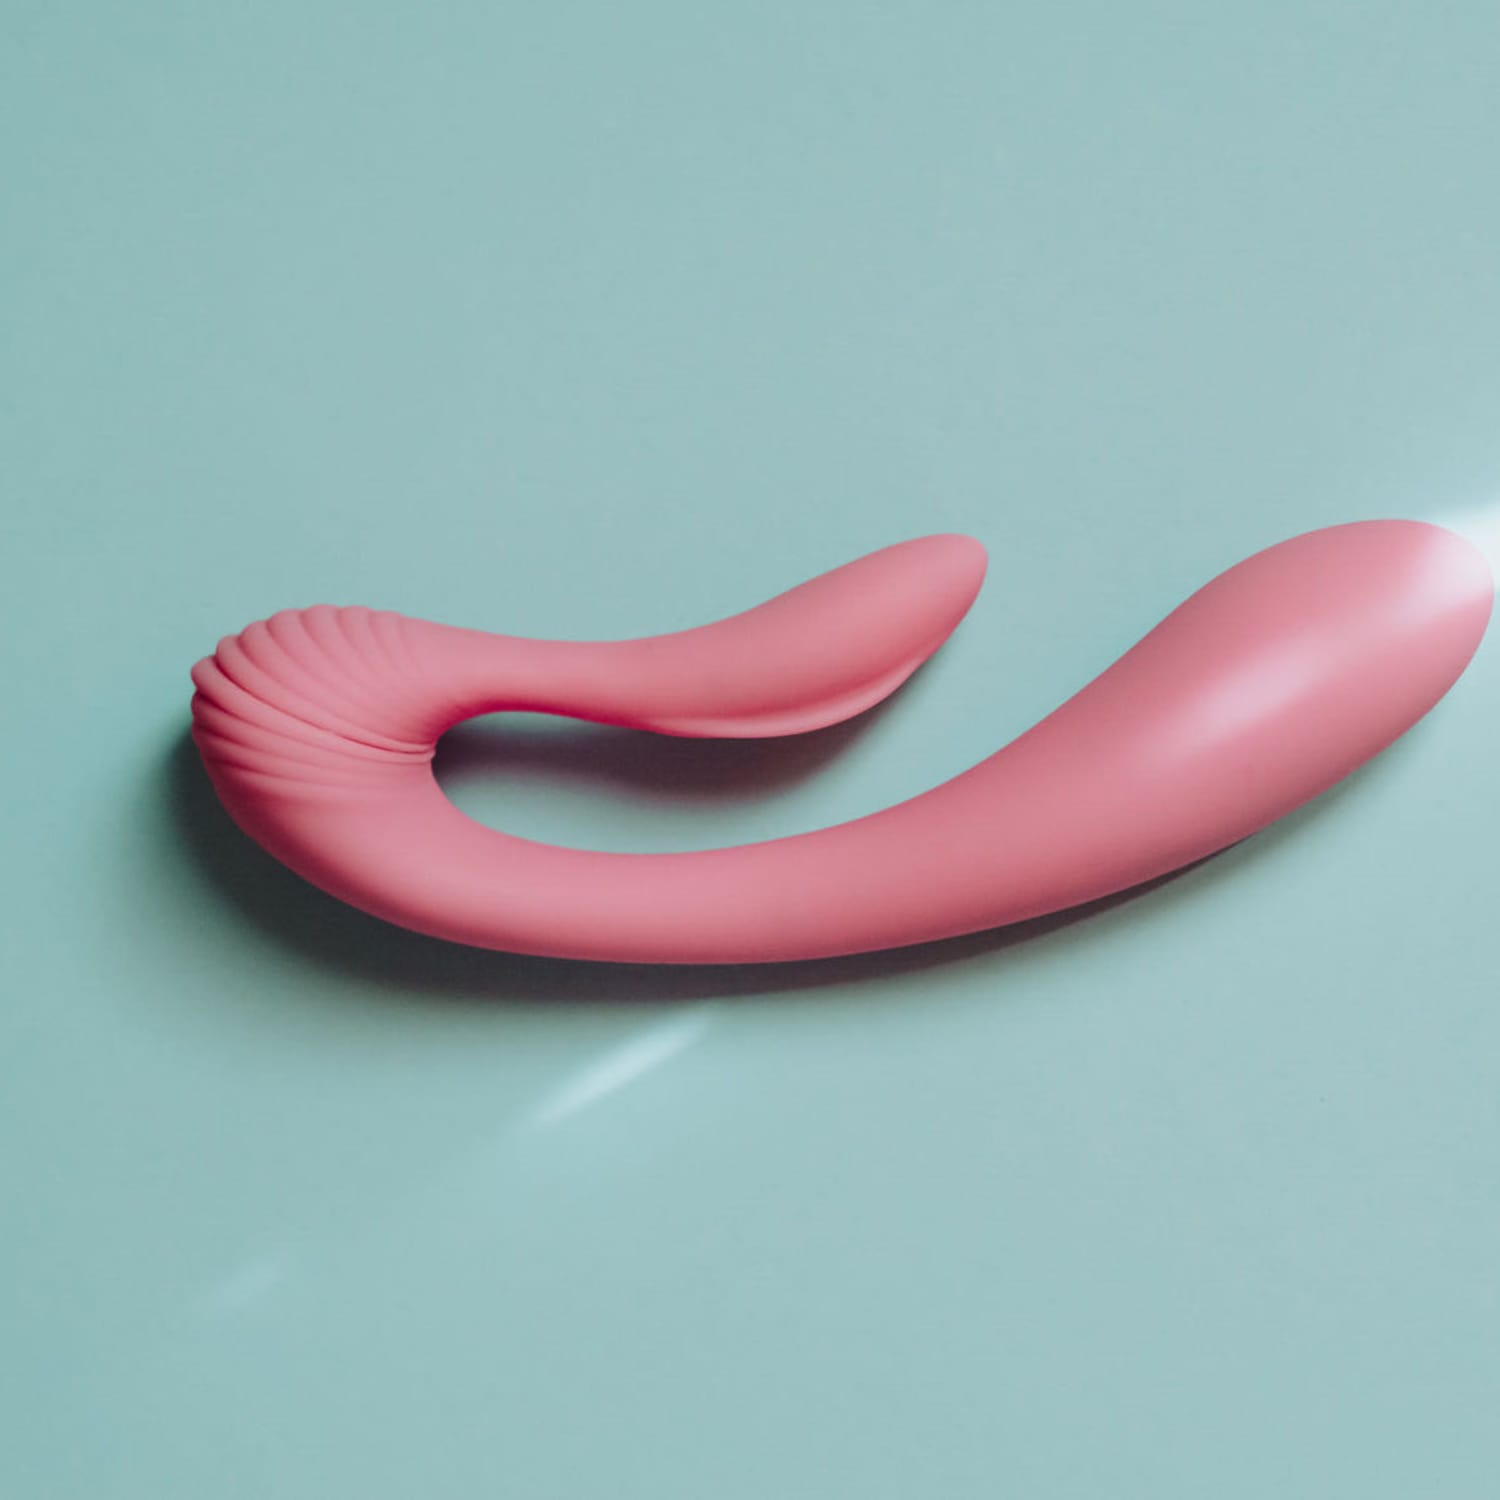 Motion Dildo Anal Sex - How to Wash Dildos and Sex Toys, According to Experts | Apartment Therapy